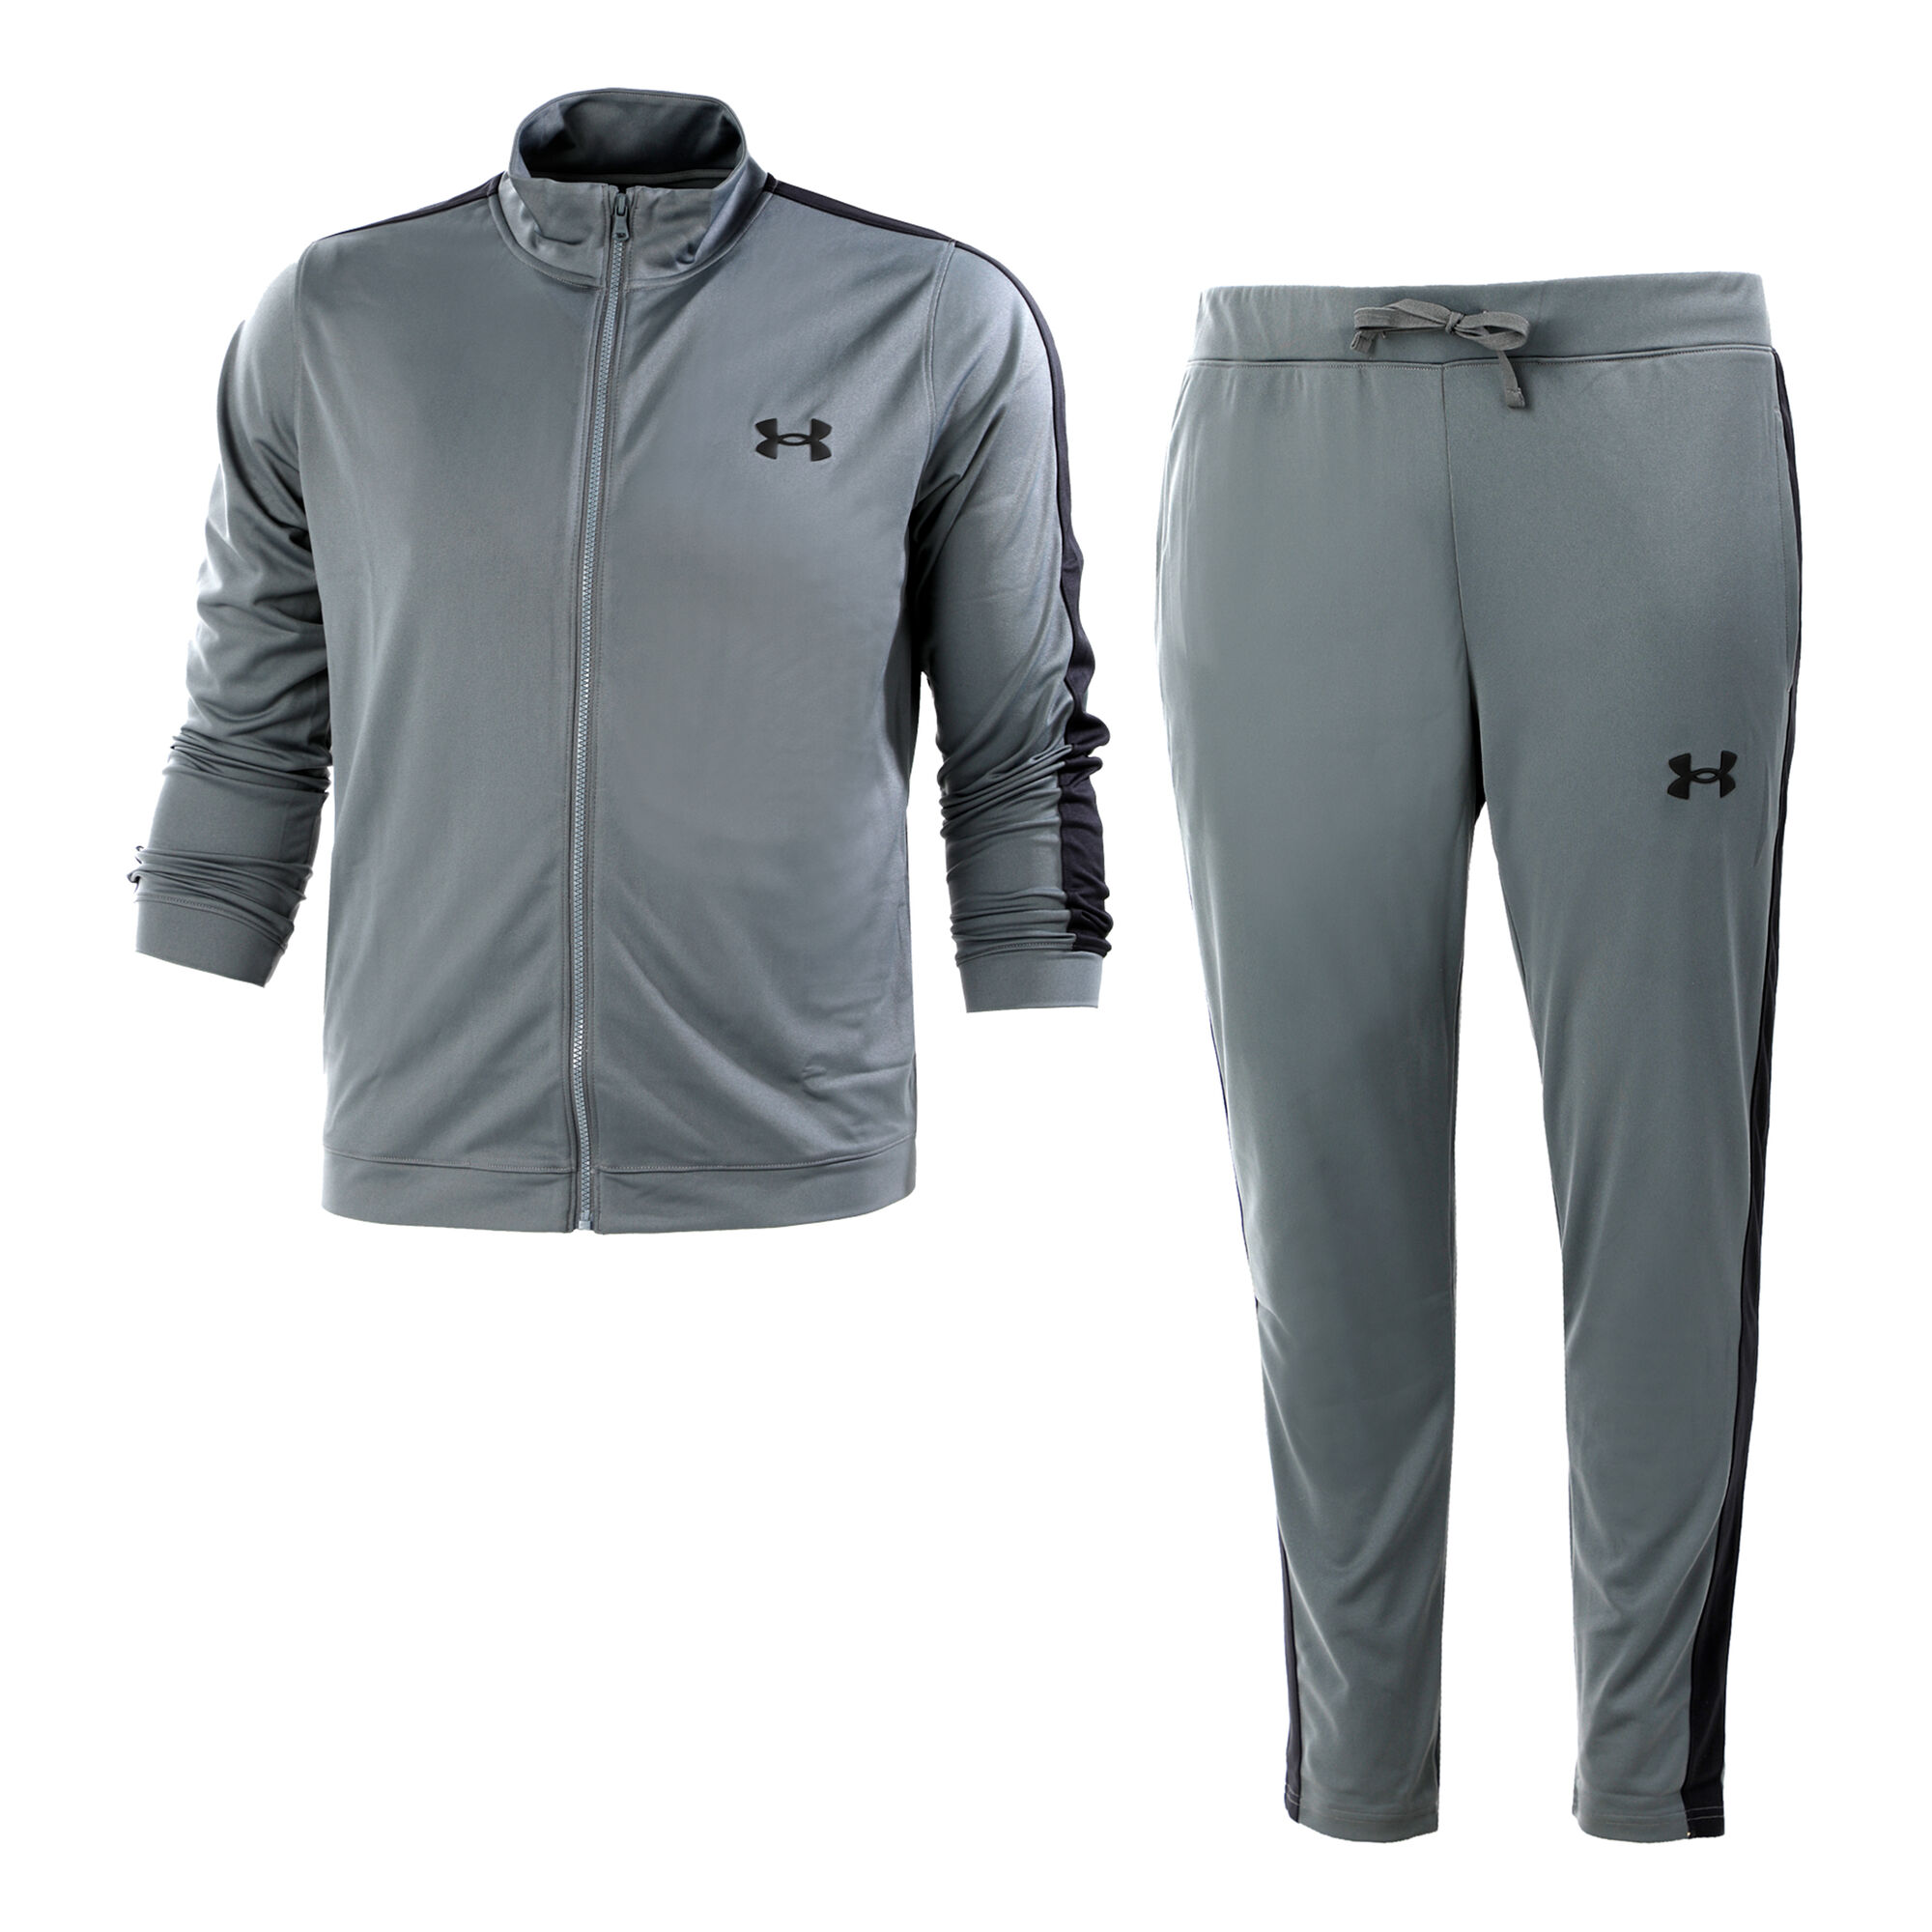 Under Armour drawstring trackies in grey